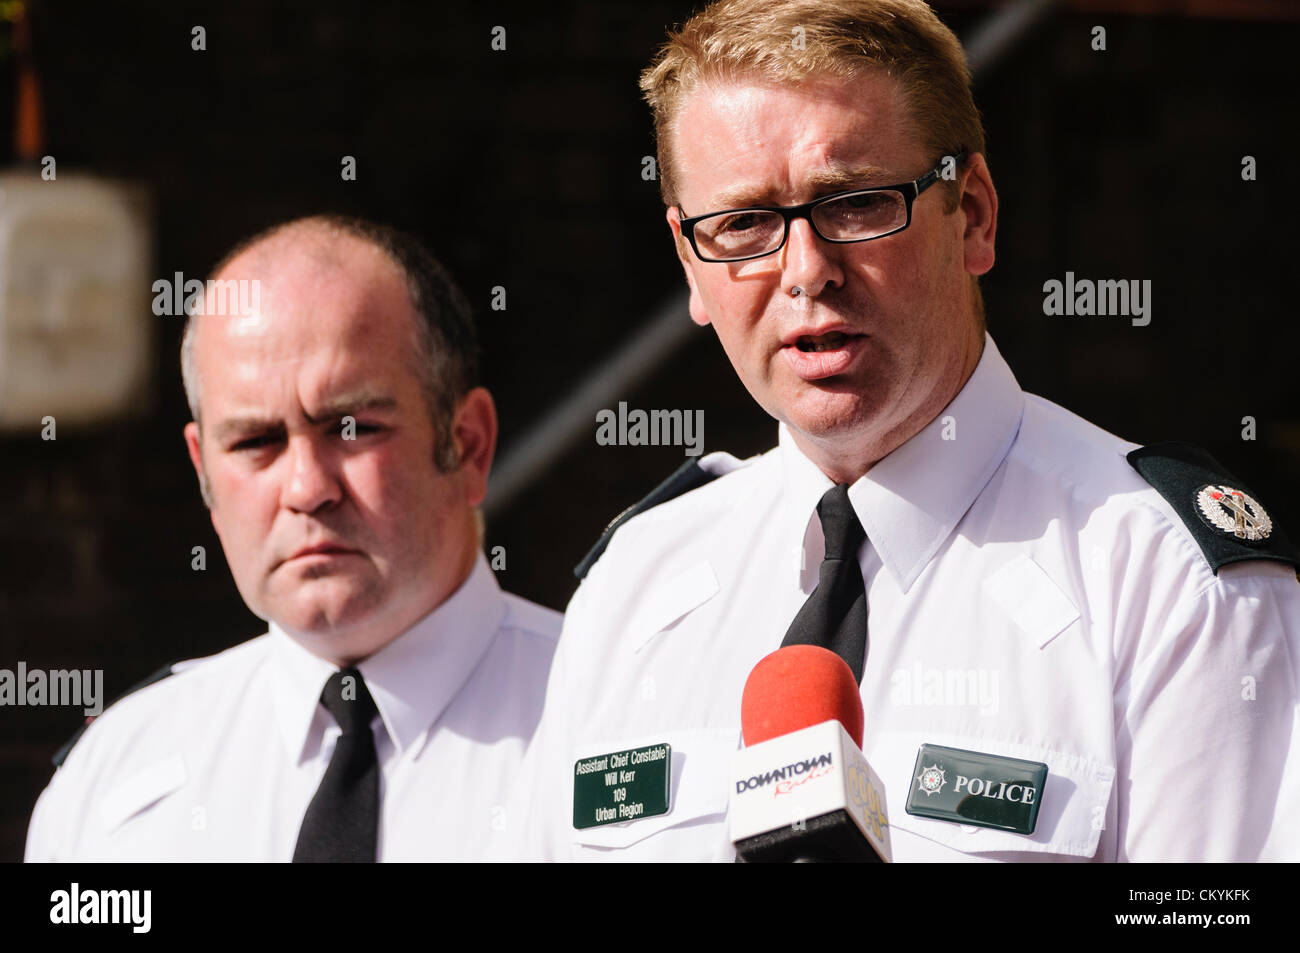 4th September 2012, Belfast - Assistant Chief Constable Will Kerr (right), and Chief Superintendent George Clarke (District Commander A District) hold a press conference regarding two successive nights of rioting in Belfast. Stock Photo